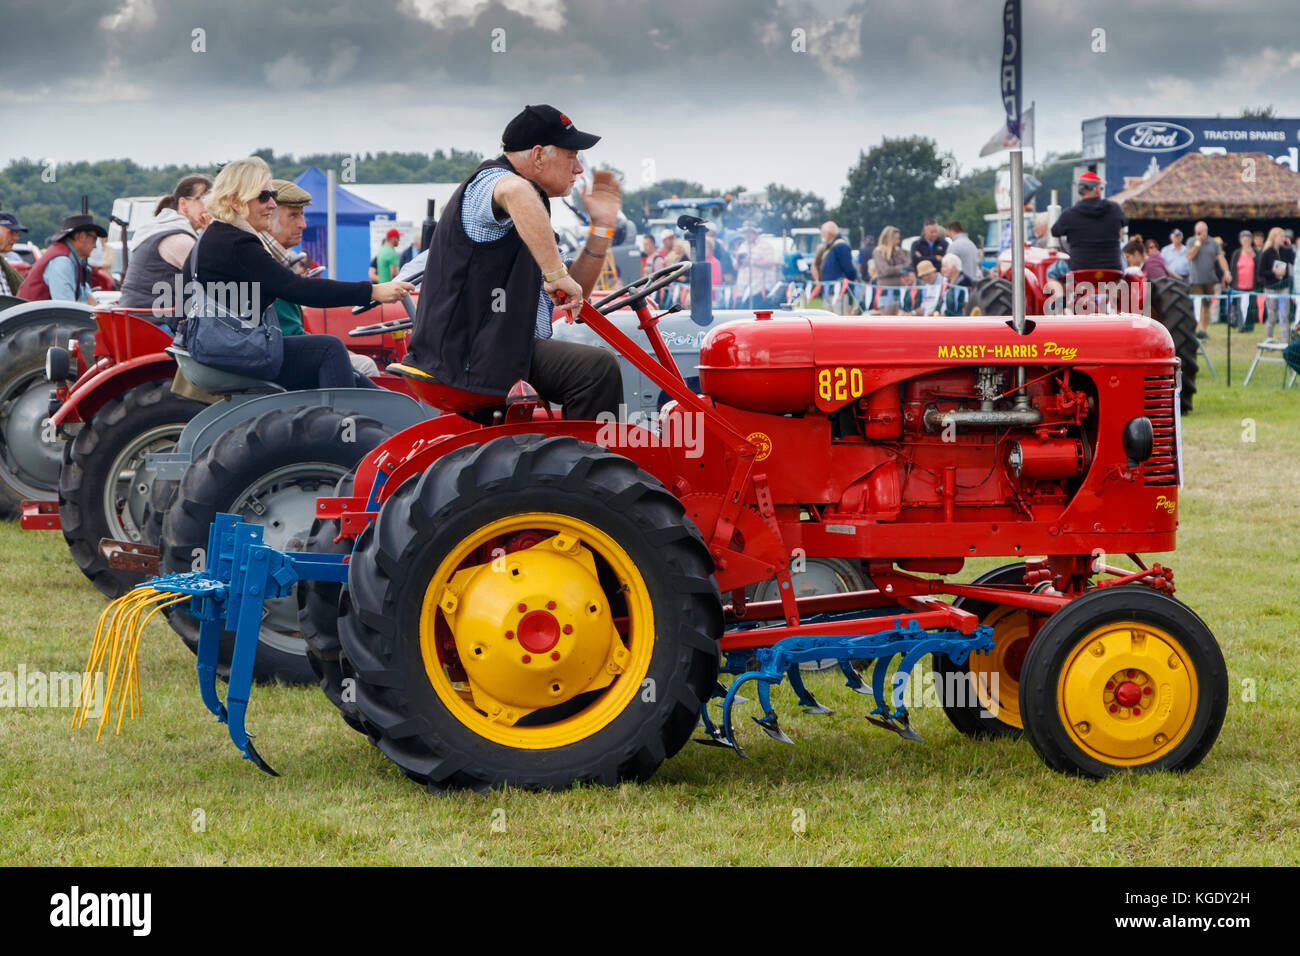 A collection of Massey-Harris and Massey-Harris Pony tractors from the 1940's and 50's at the 2017 Norfolk Starting Handle Club Show, UK. Stock Photo